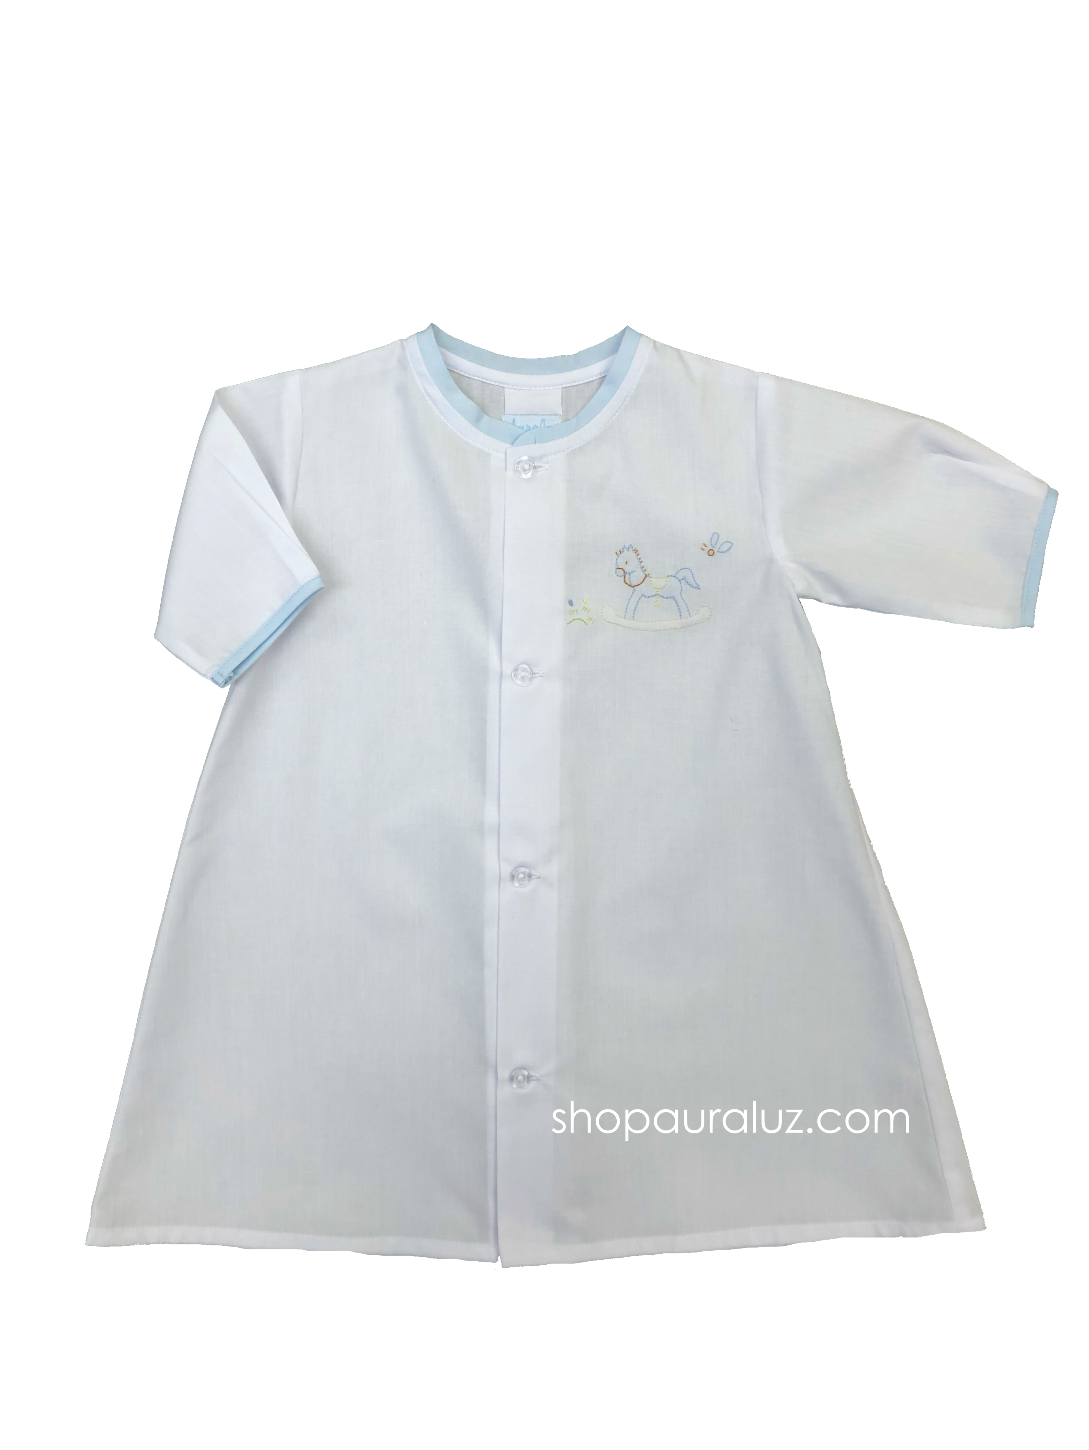 Auraluz Boy Day Gown, l/s...White with blue trim and embroidered rocking horse